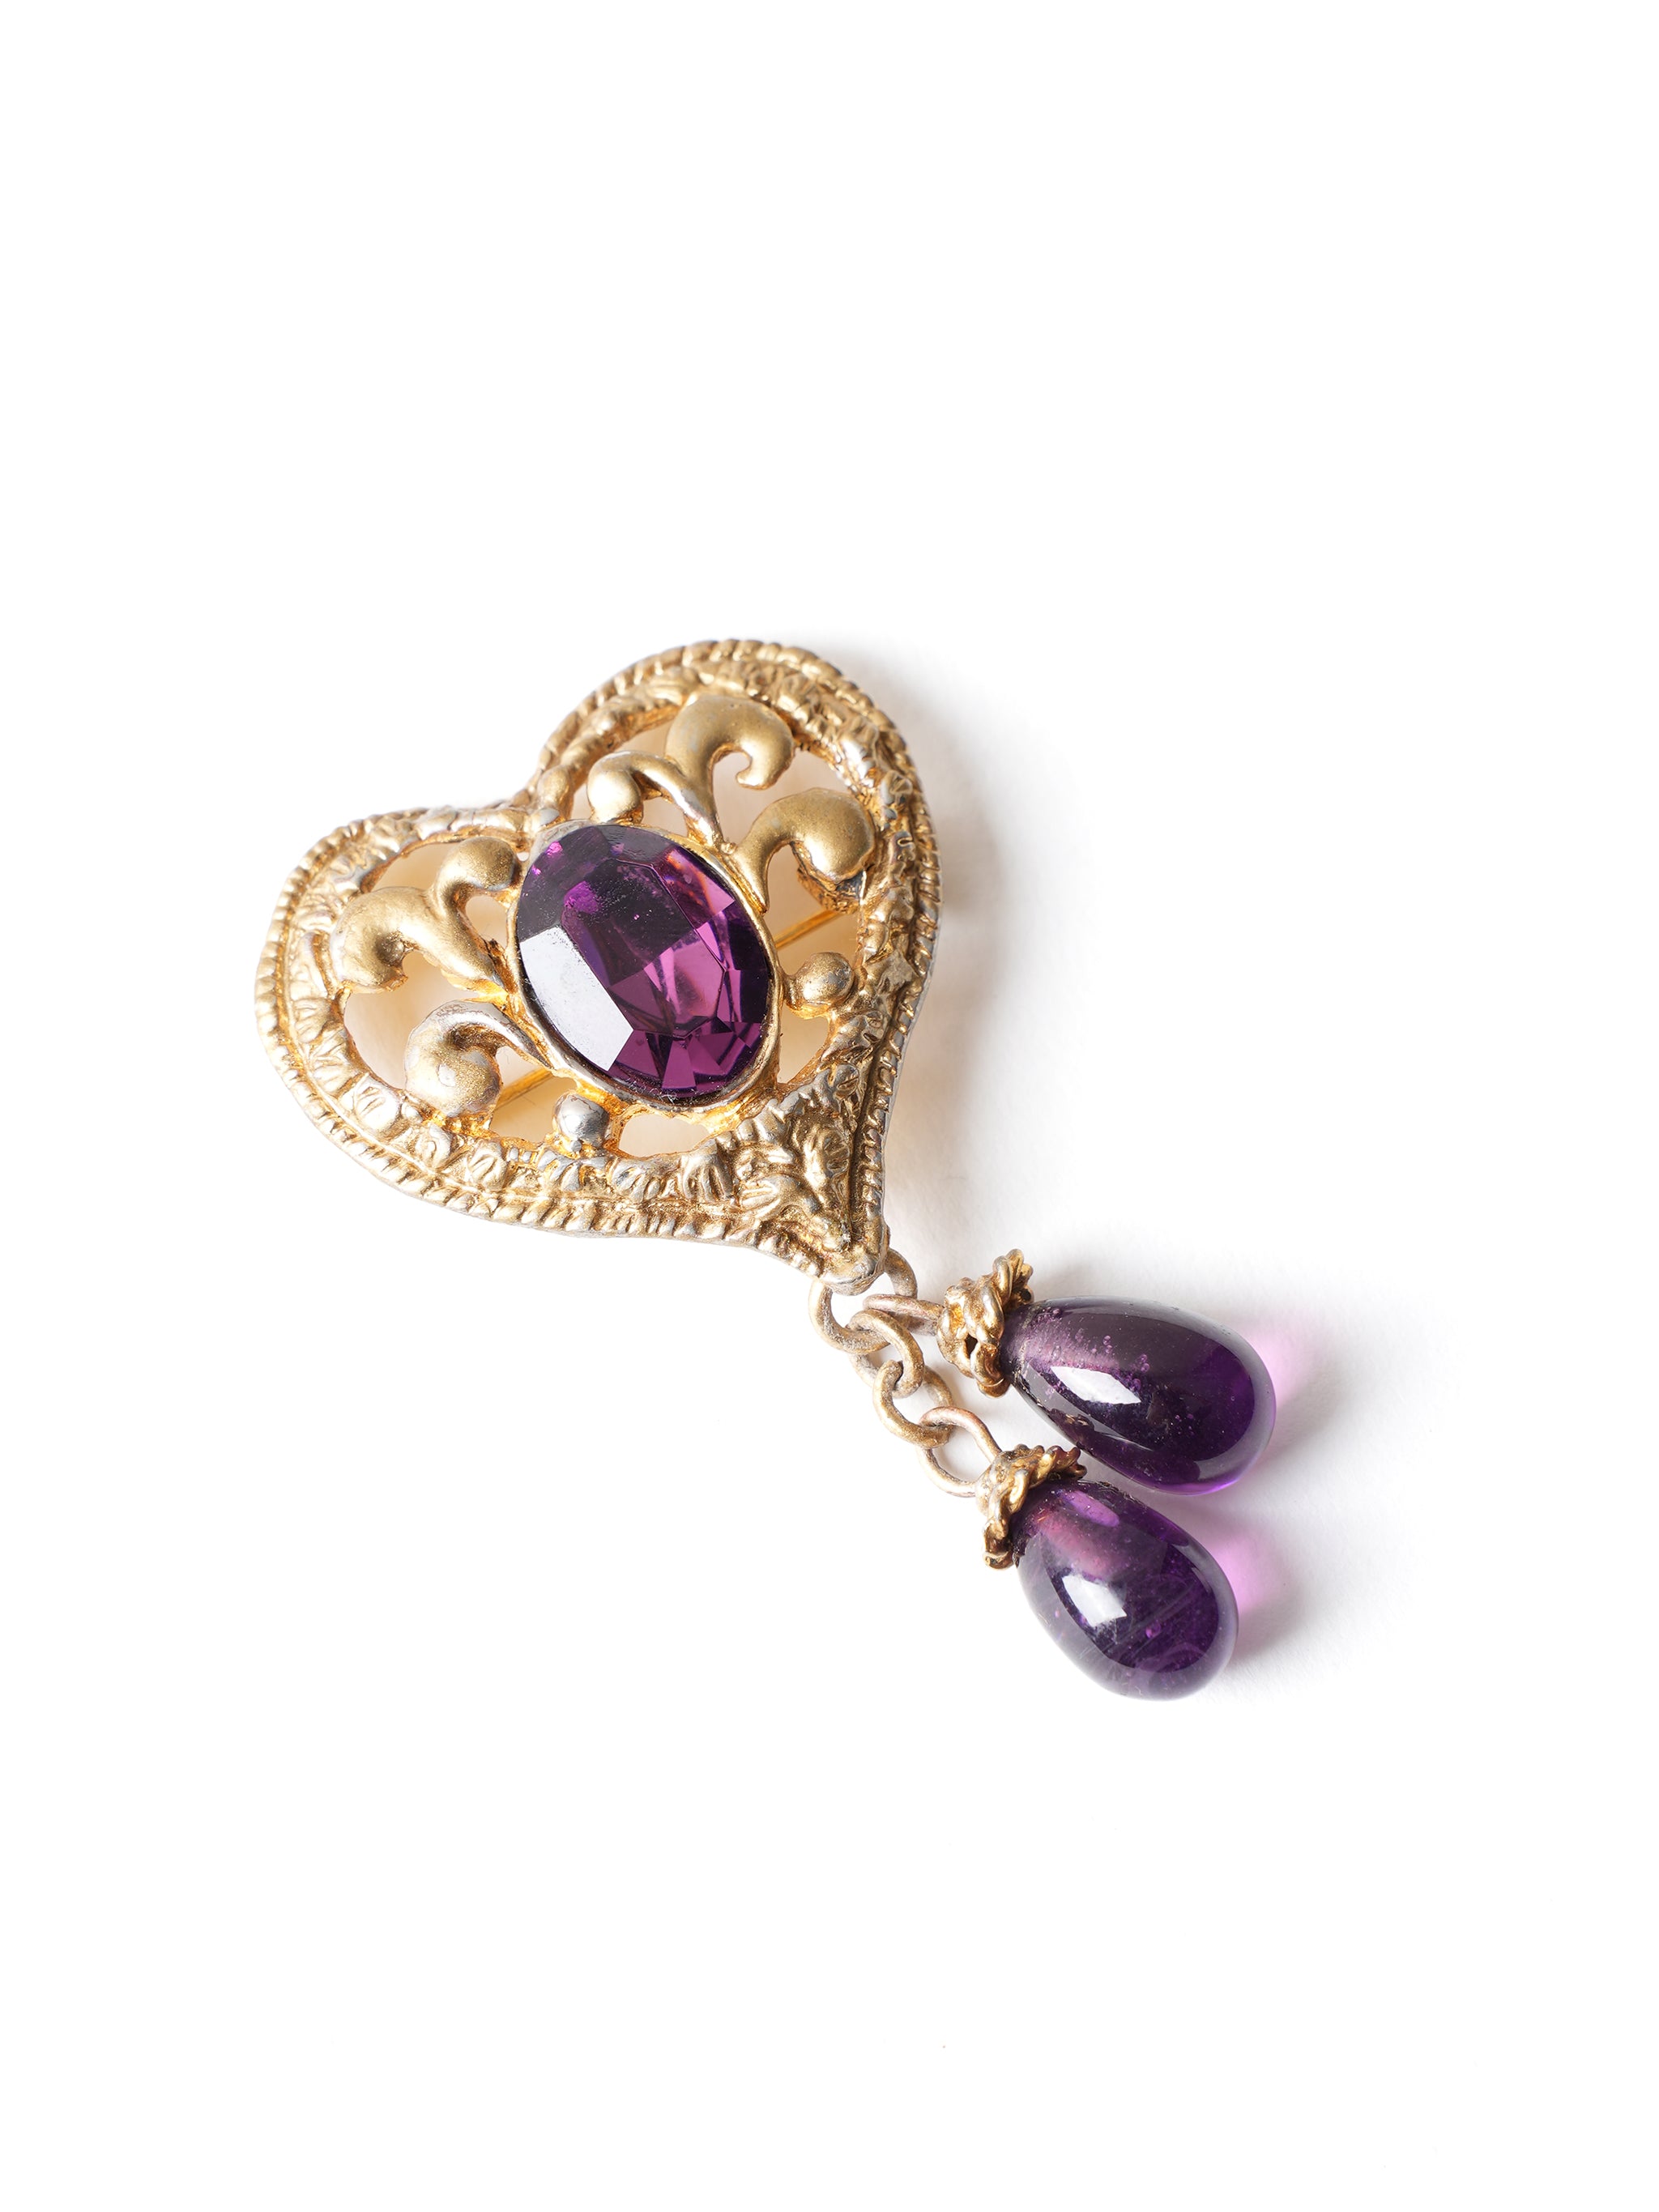 Christian Lacroix Brooch